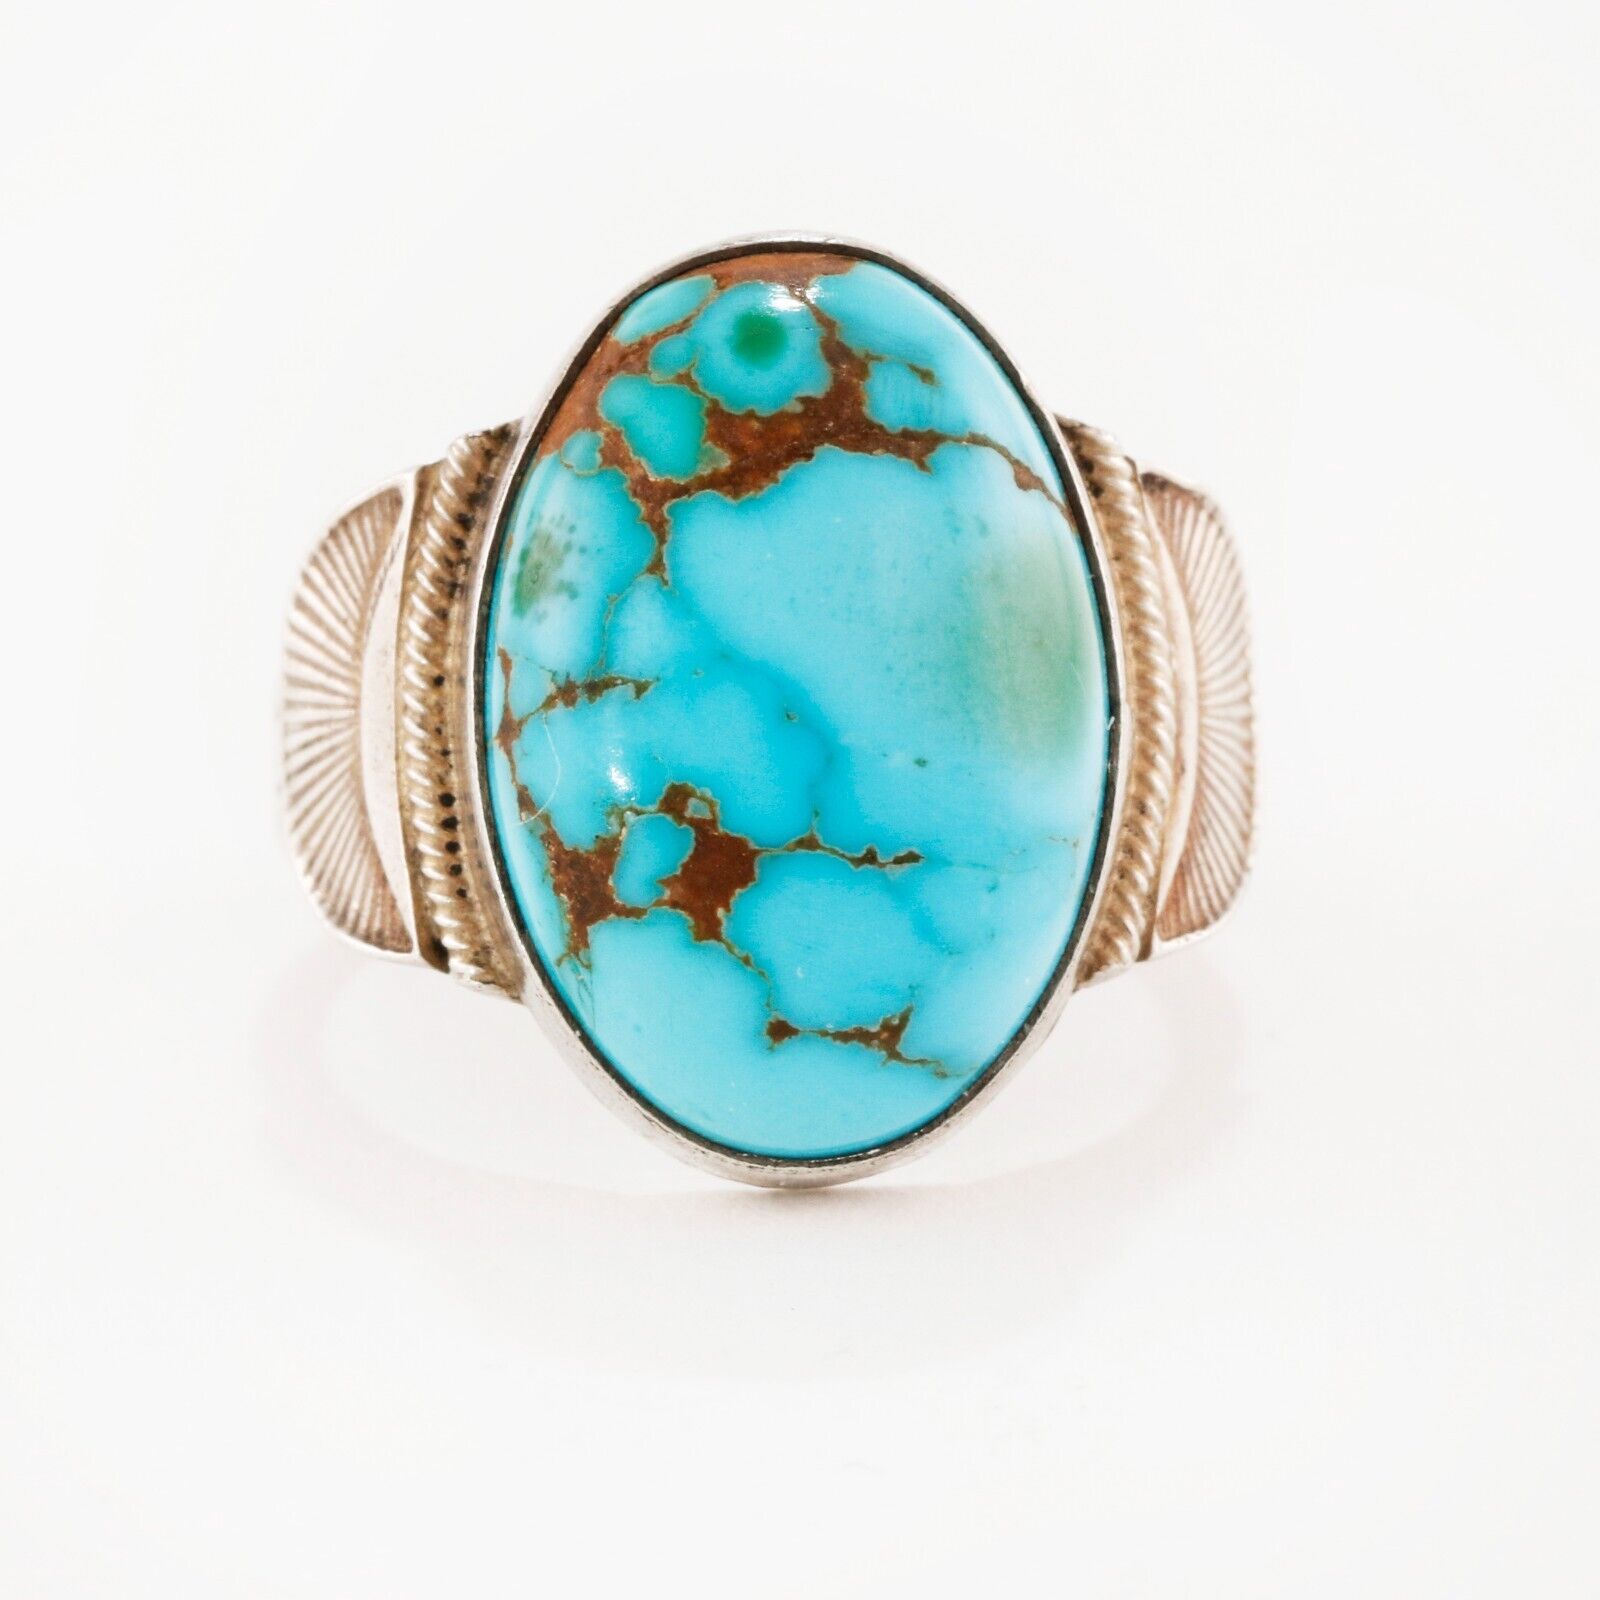 EARLY NATIVE AMERICAN STERLING BLUE THUNDERBIRD TURQUOISE STAMPED RING 5.5